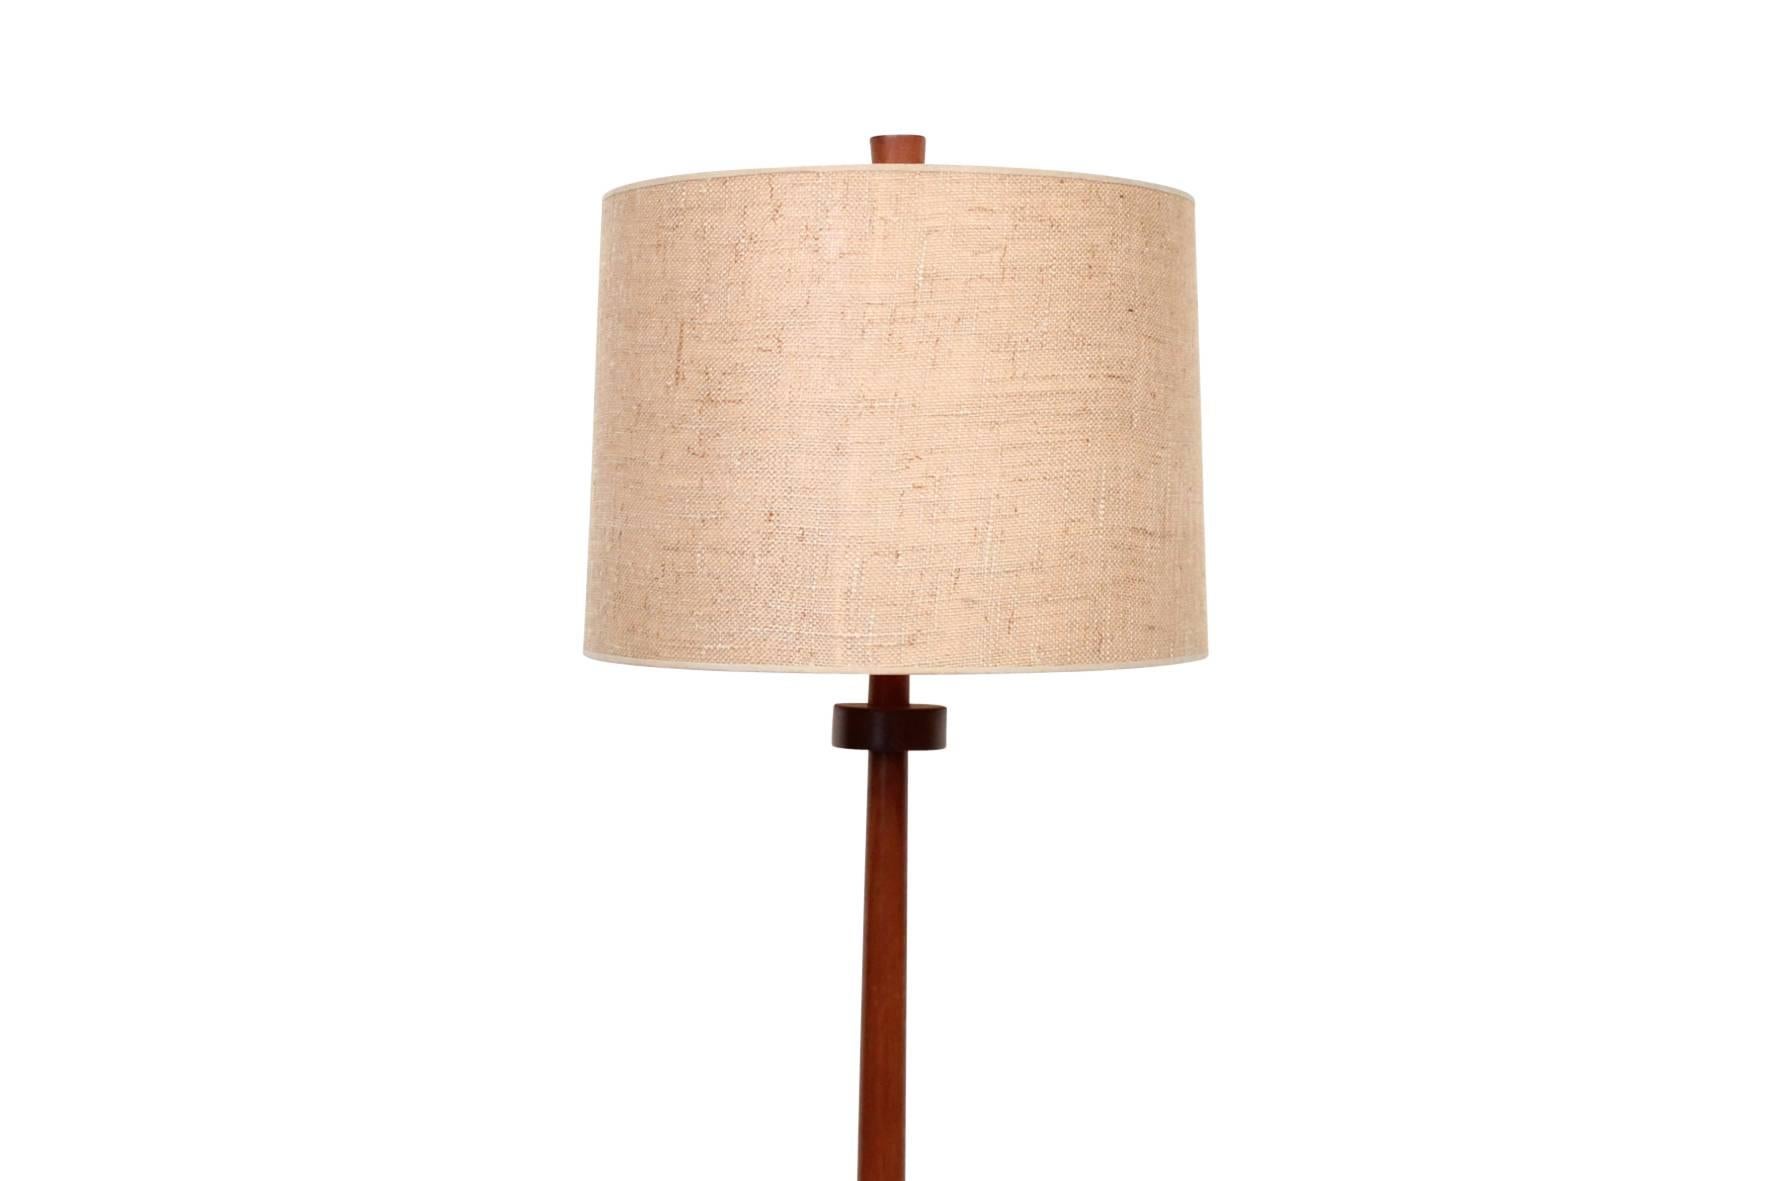 Sculptural walnut and ceramic floor lamp by Jane and Gordon Martz for Marshall Studios. Seldom seen design. Dimensions below are with shade pictured.